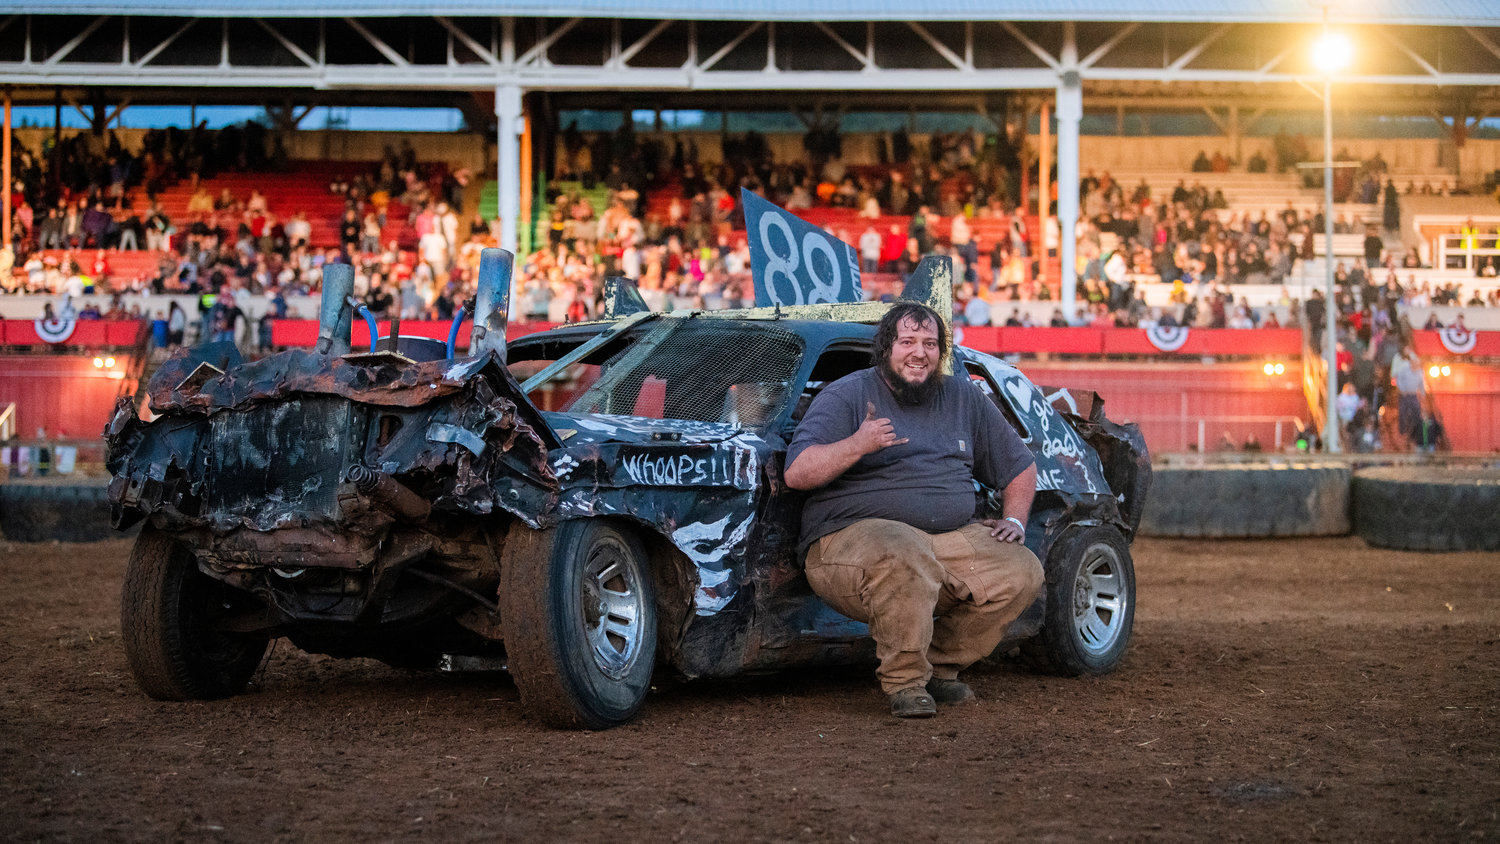 Josh Levine, 32, of Chehalis, poses with his car after winning the demolition derby main event at Centralia Summerfest at the Southwest Washington Fairgrounds on Sunday night.